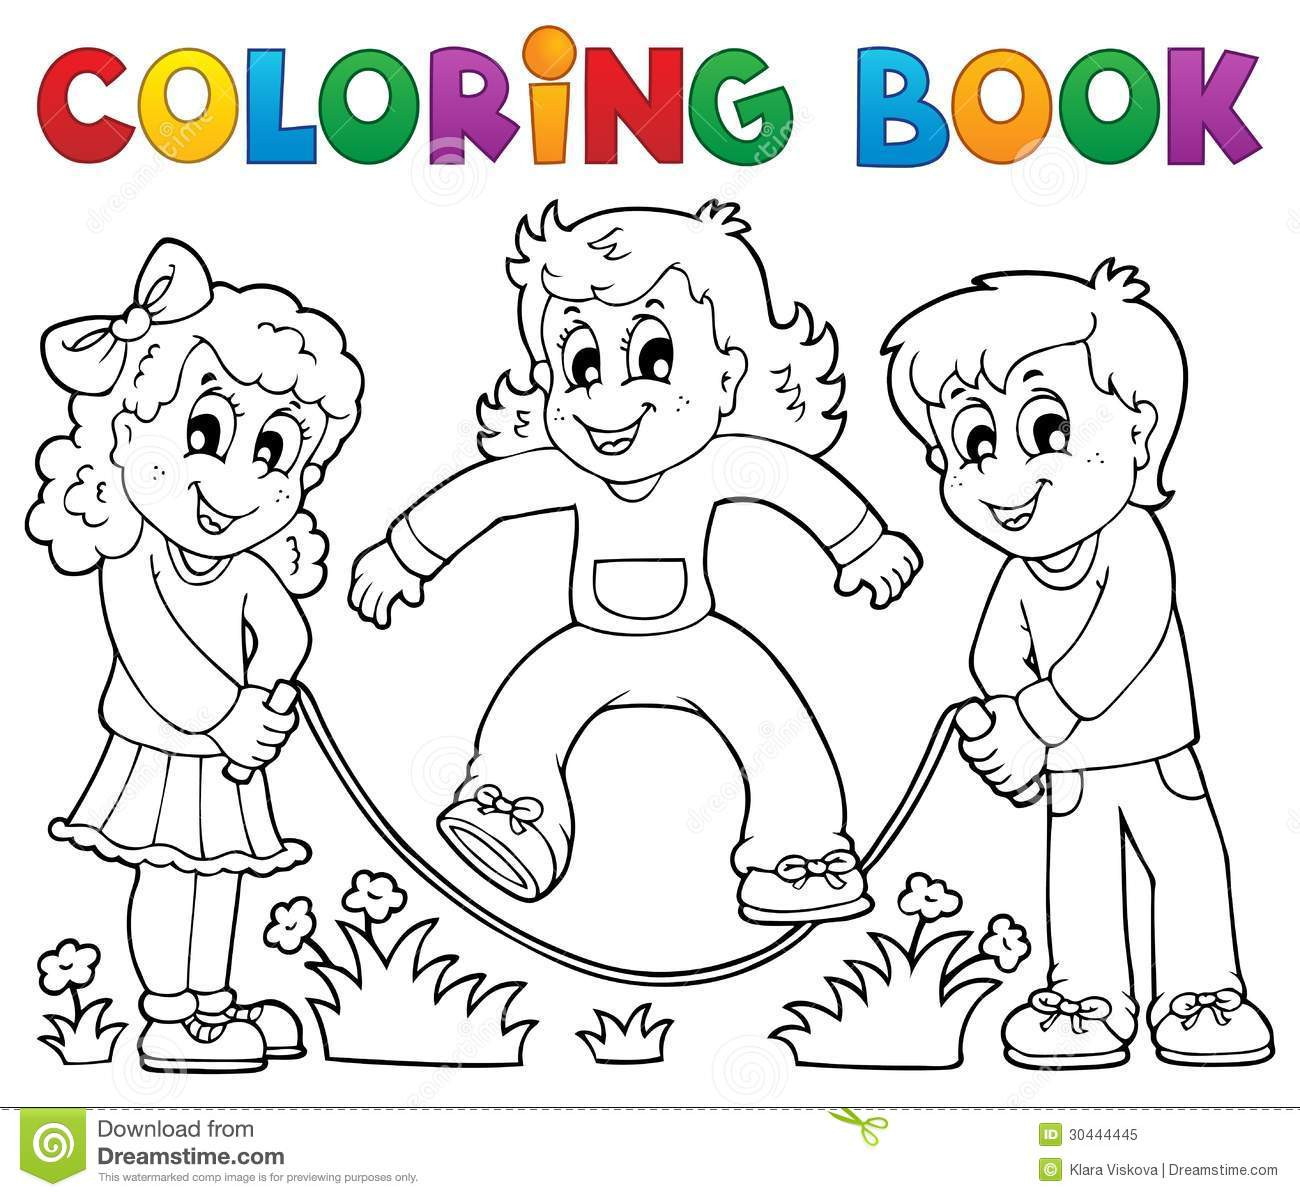 Coloring Book Toddler
 Coloring Book Kids Play Theme 1 Royalty Free Stock